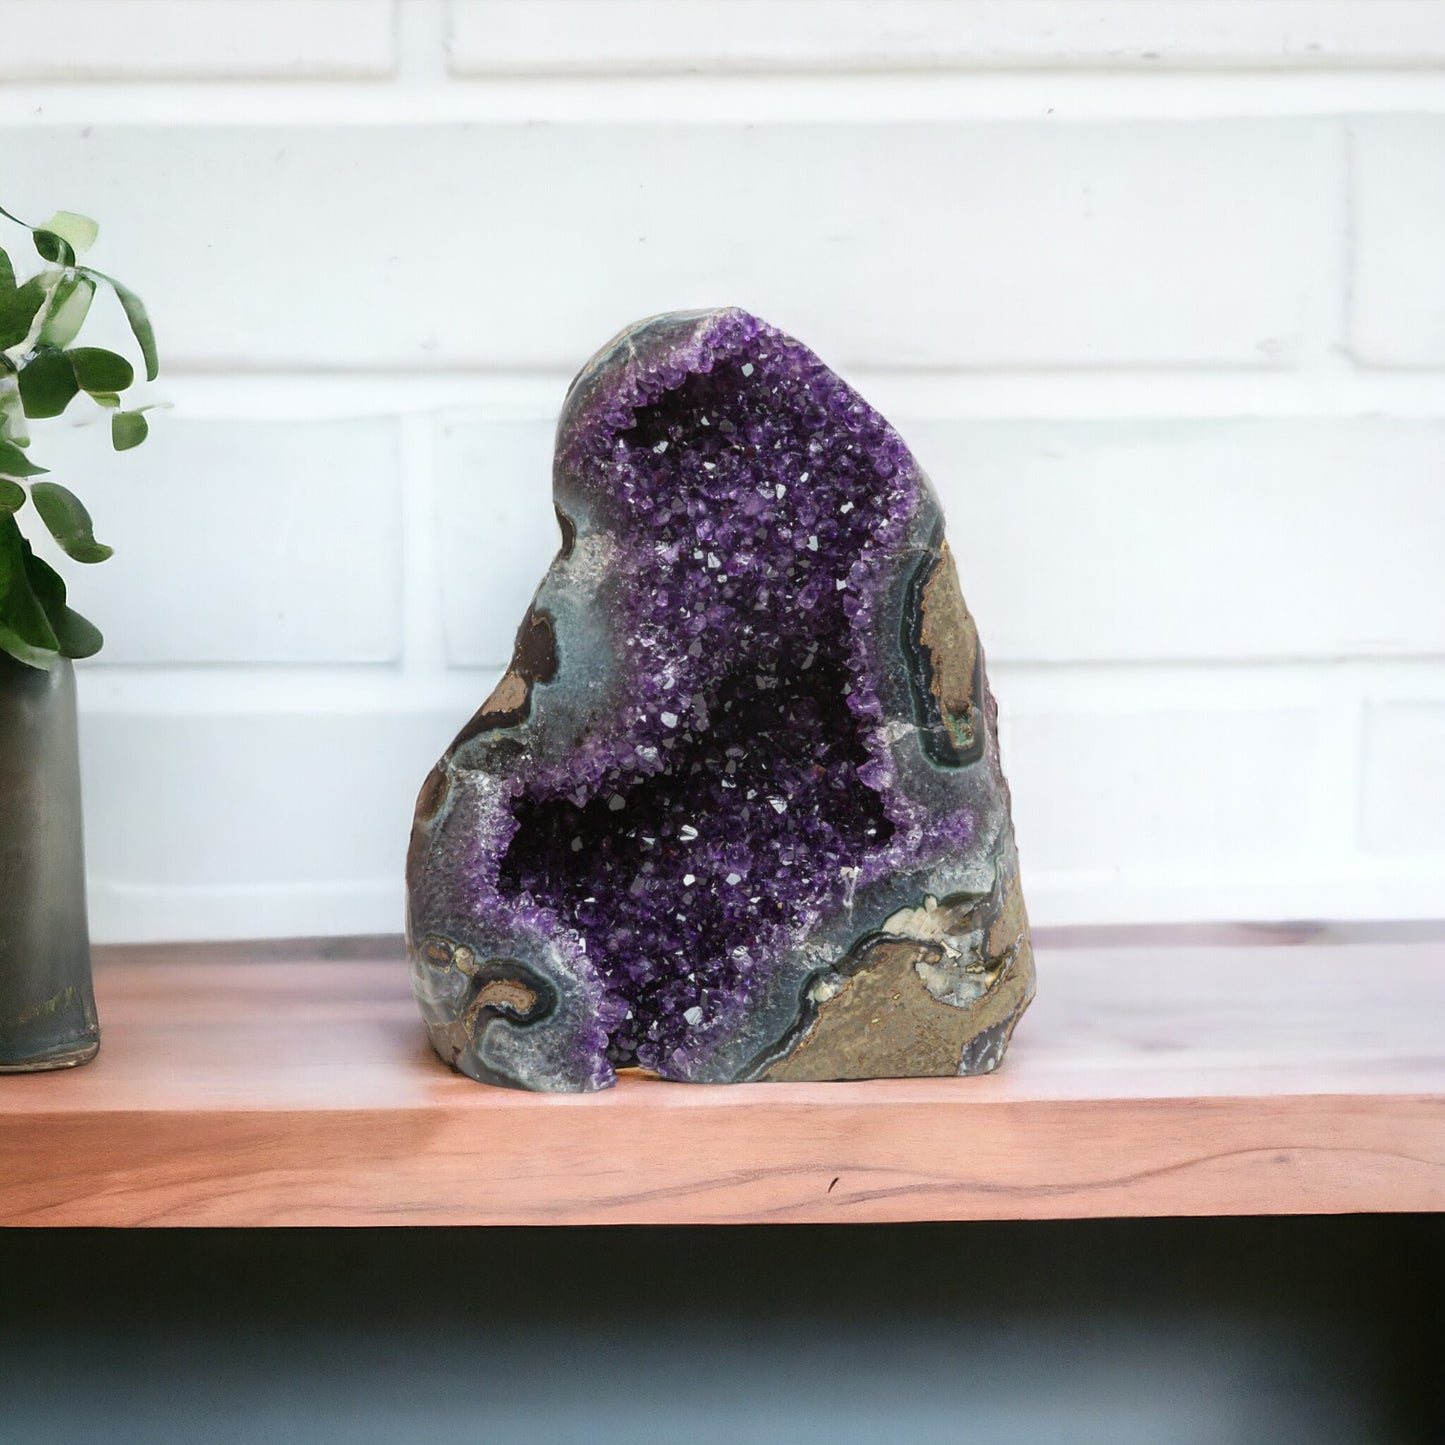 10 lbs Unique Collectors Quality Amethyst Geode - Large Natural Deep Purple Crystal Cluster Stone from Uruguay